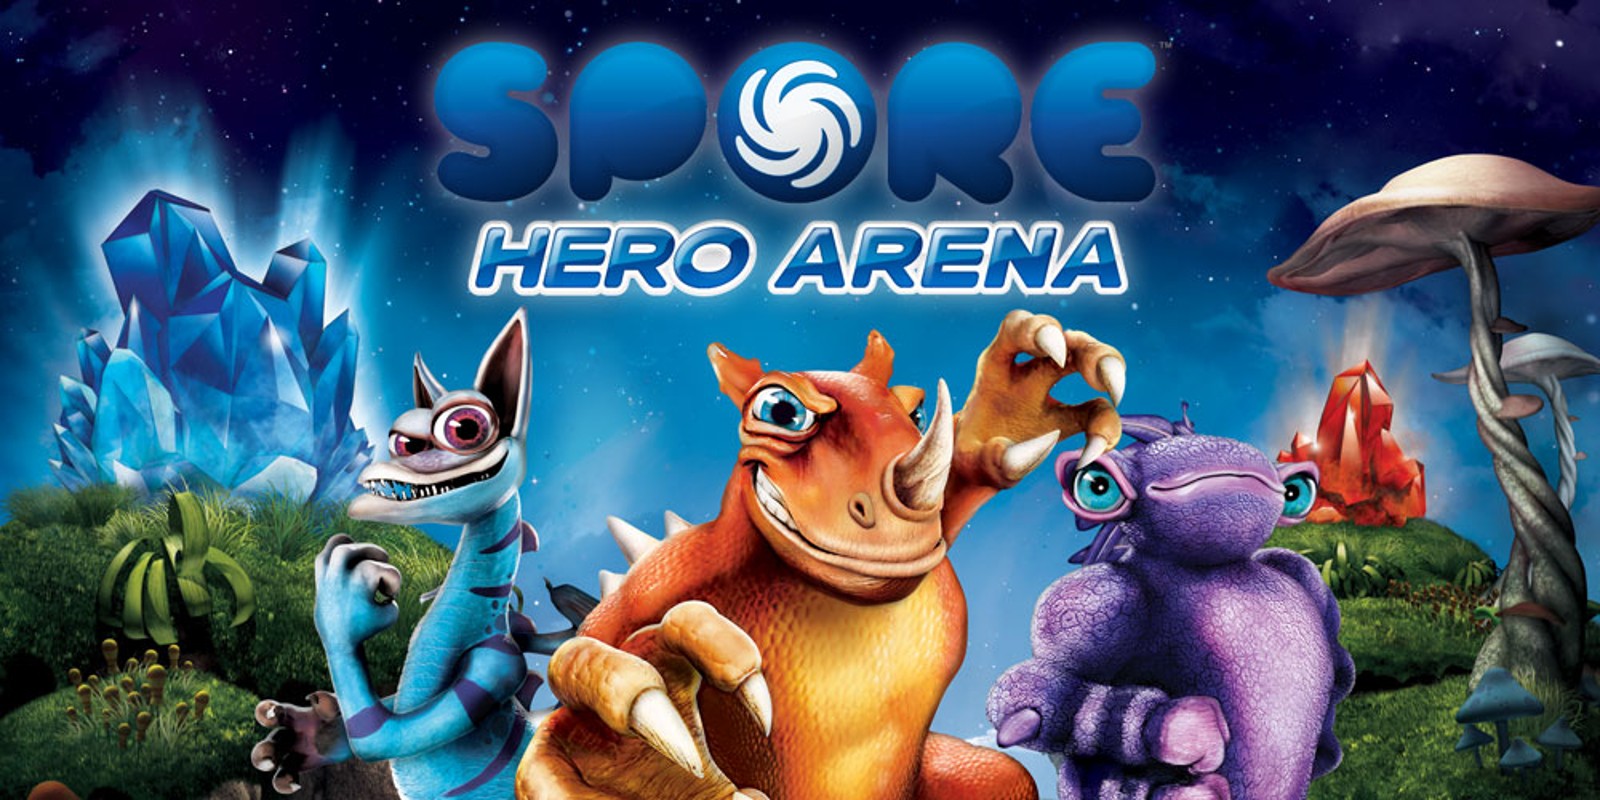 spore game online